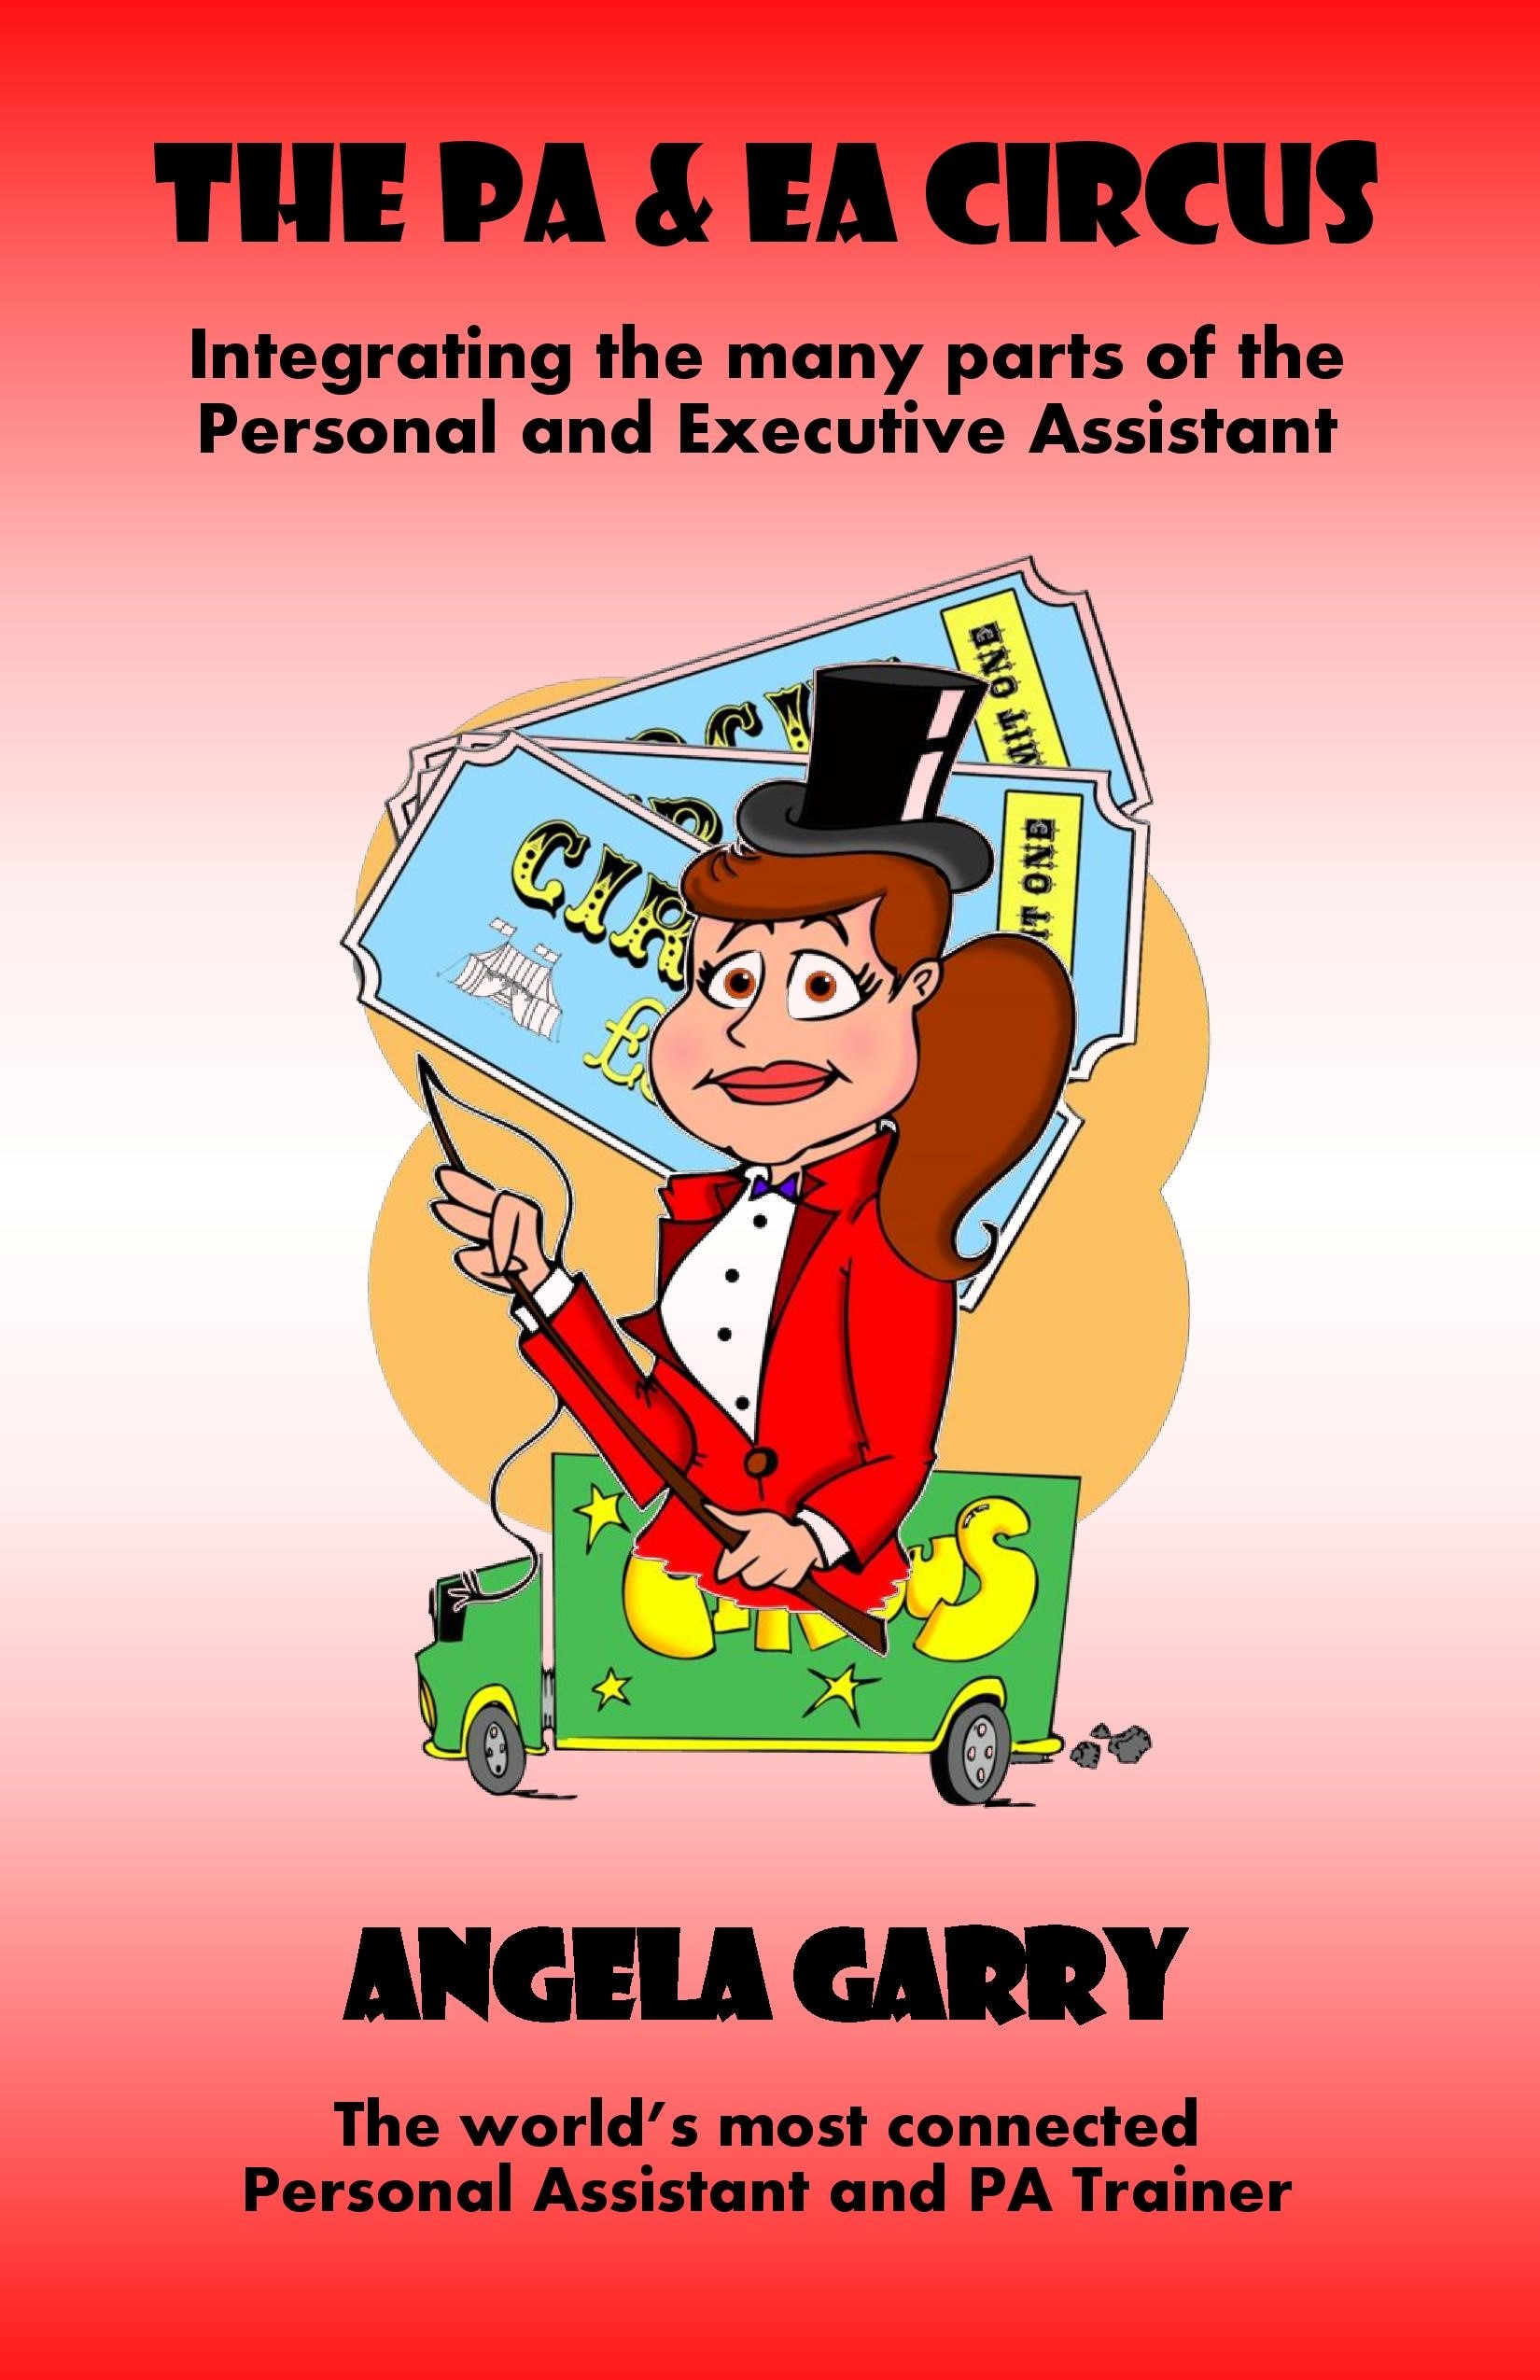 The PA & EA Circus: integrating the many parts of the Personal and Executive Assistant